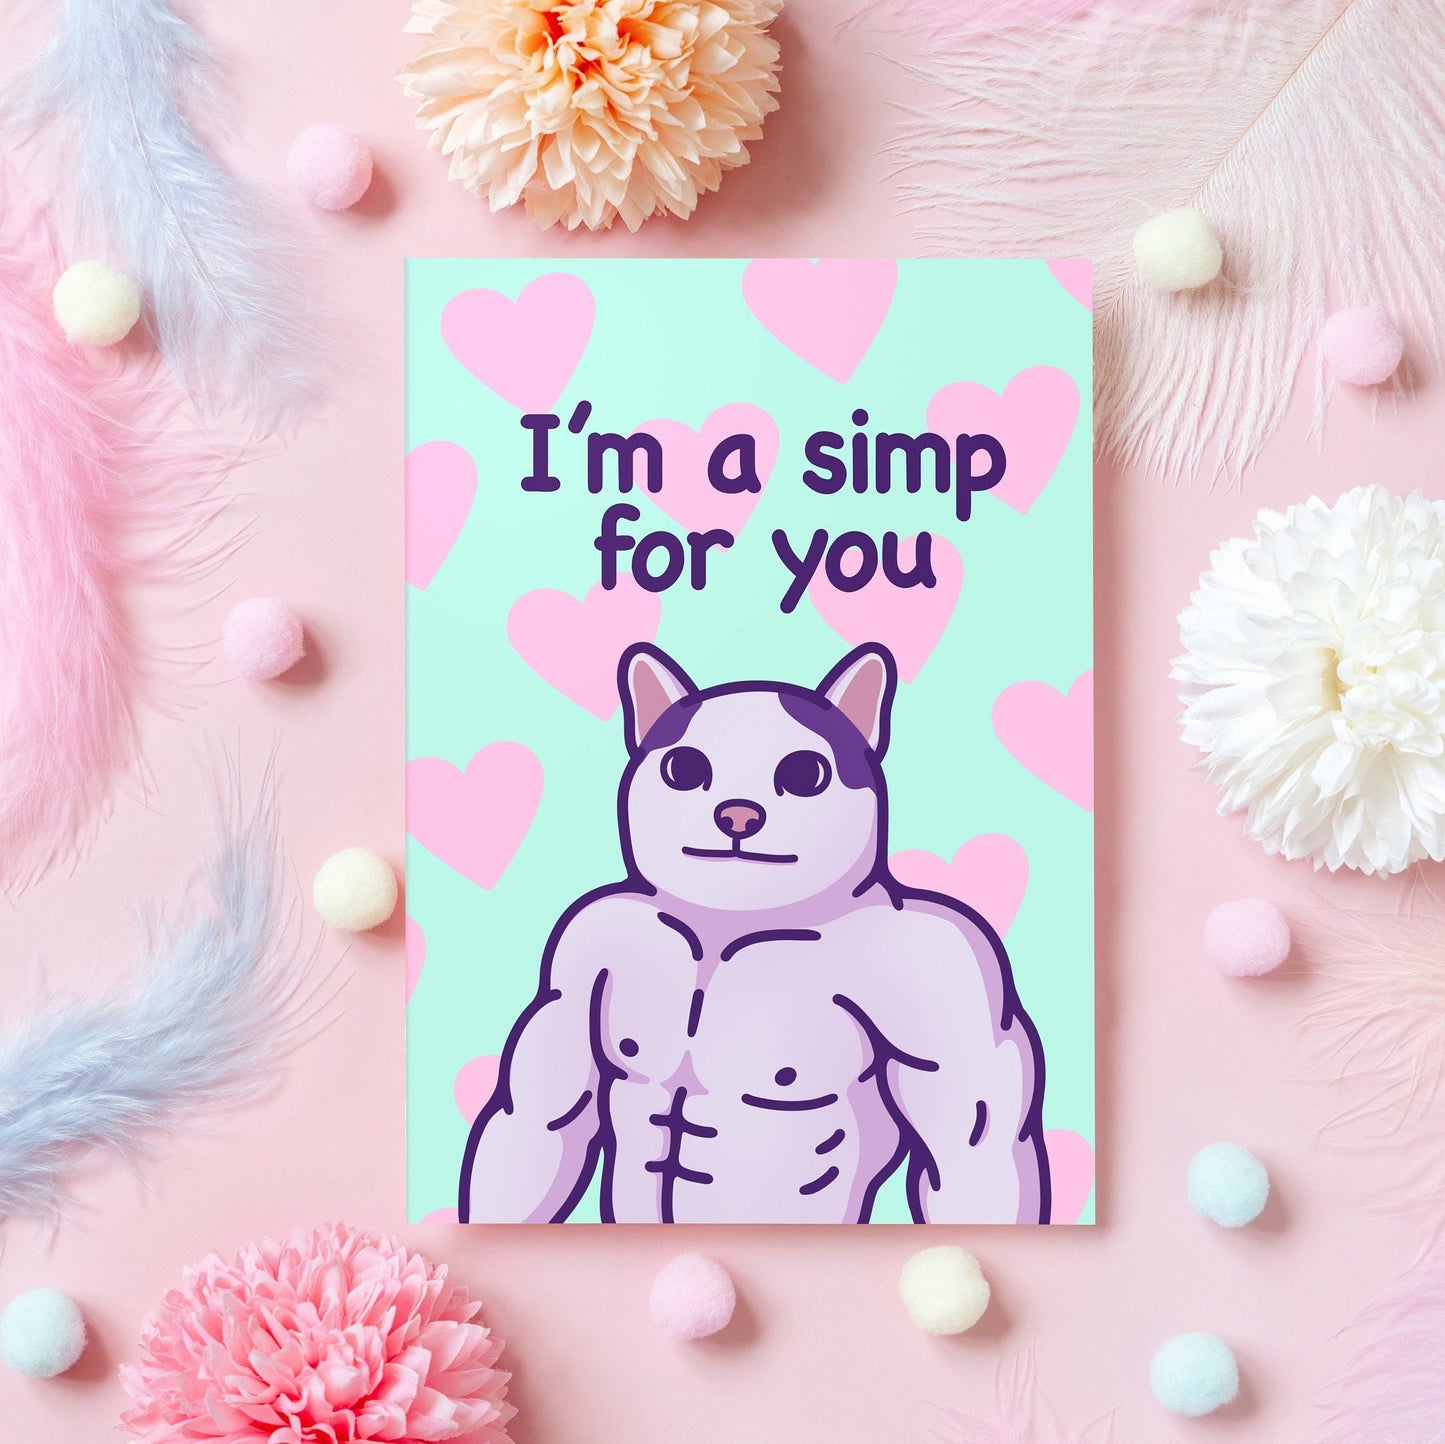 Meme Anniversary Card | I'm a Simp for You | Funny Cat Card for Husband, Wife, Boyfriend, Girlfriend | Gift Her or Him